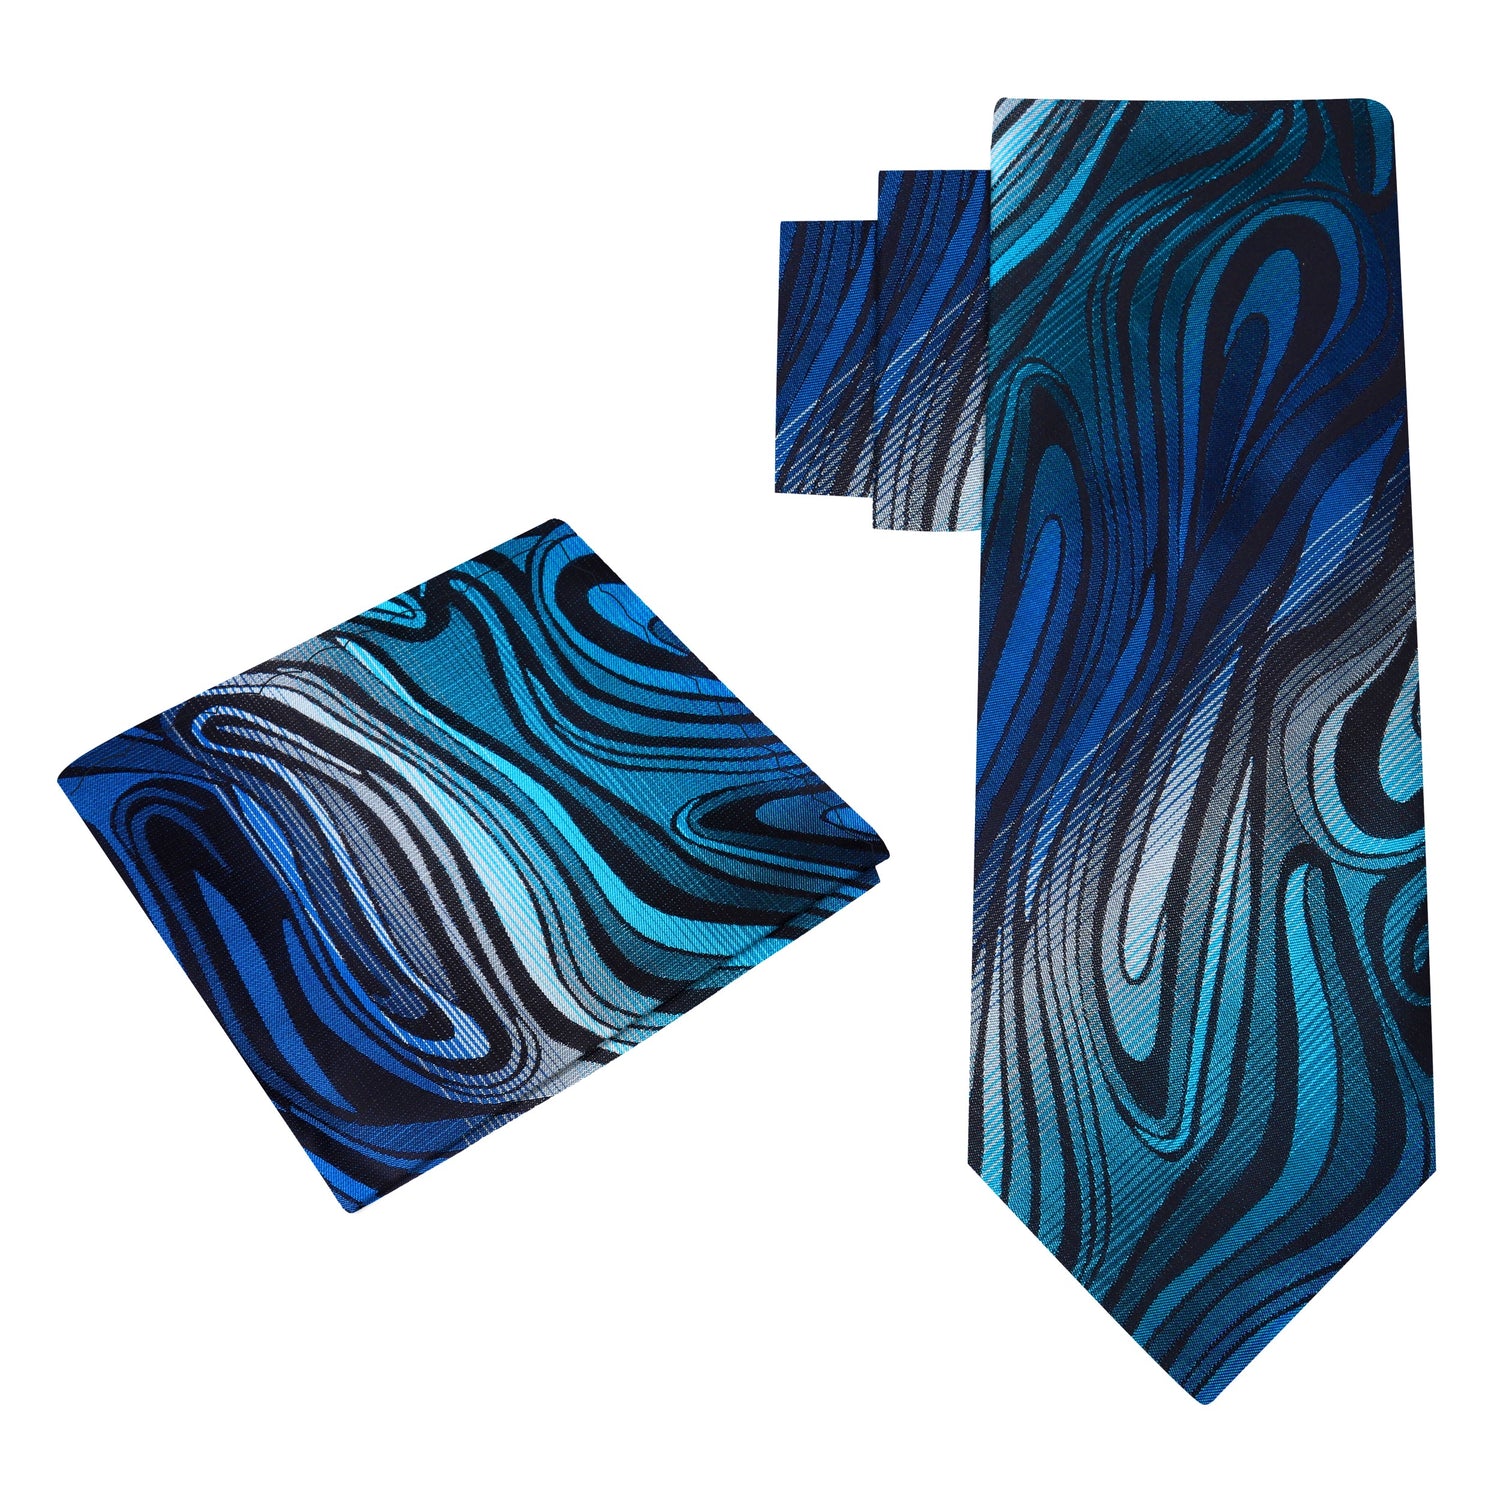 Alt View: Shades of Blue and Grey Abstract Fire Necktie and Charcoal with Matching Square